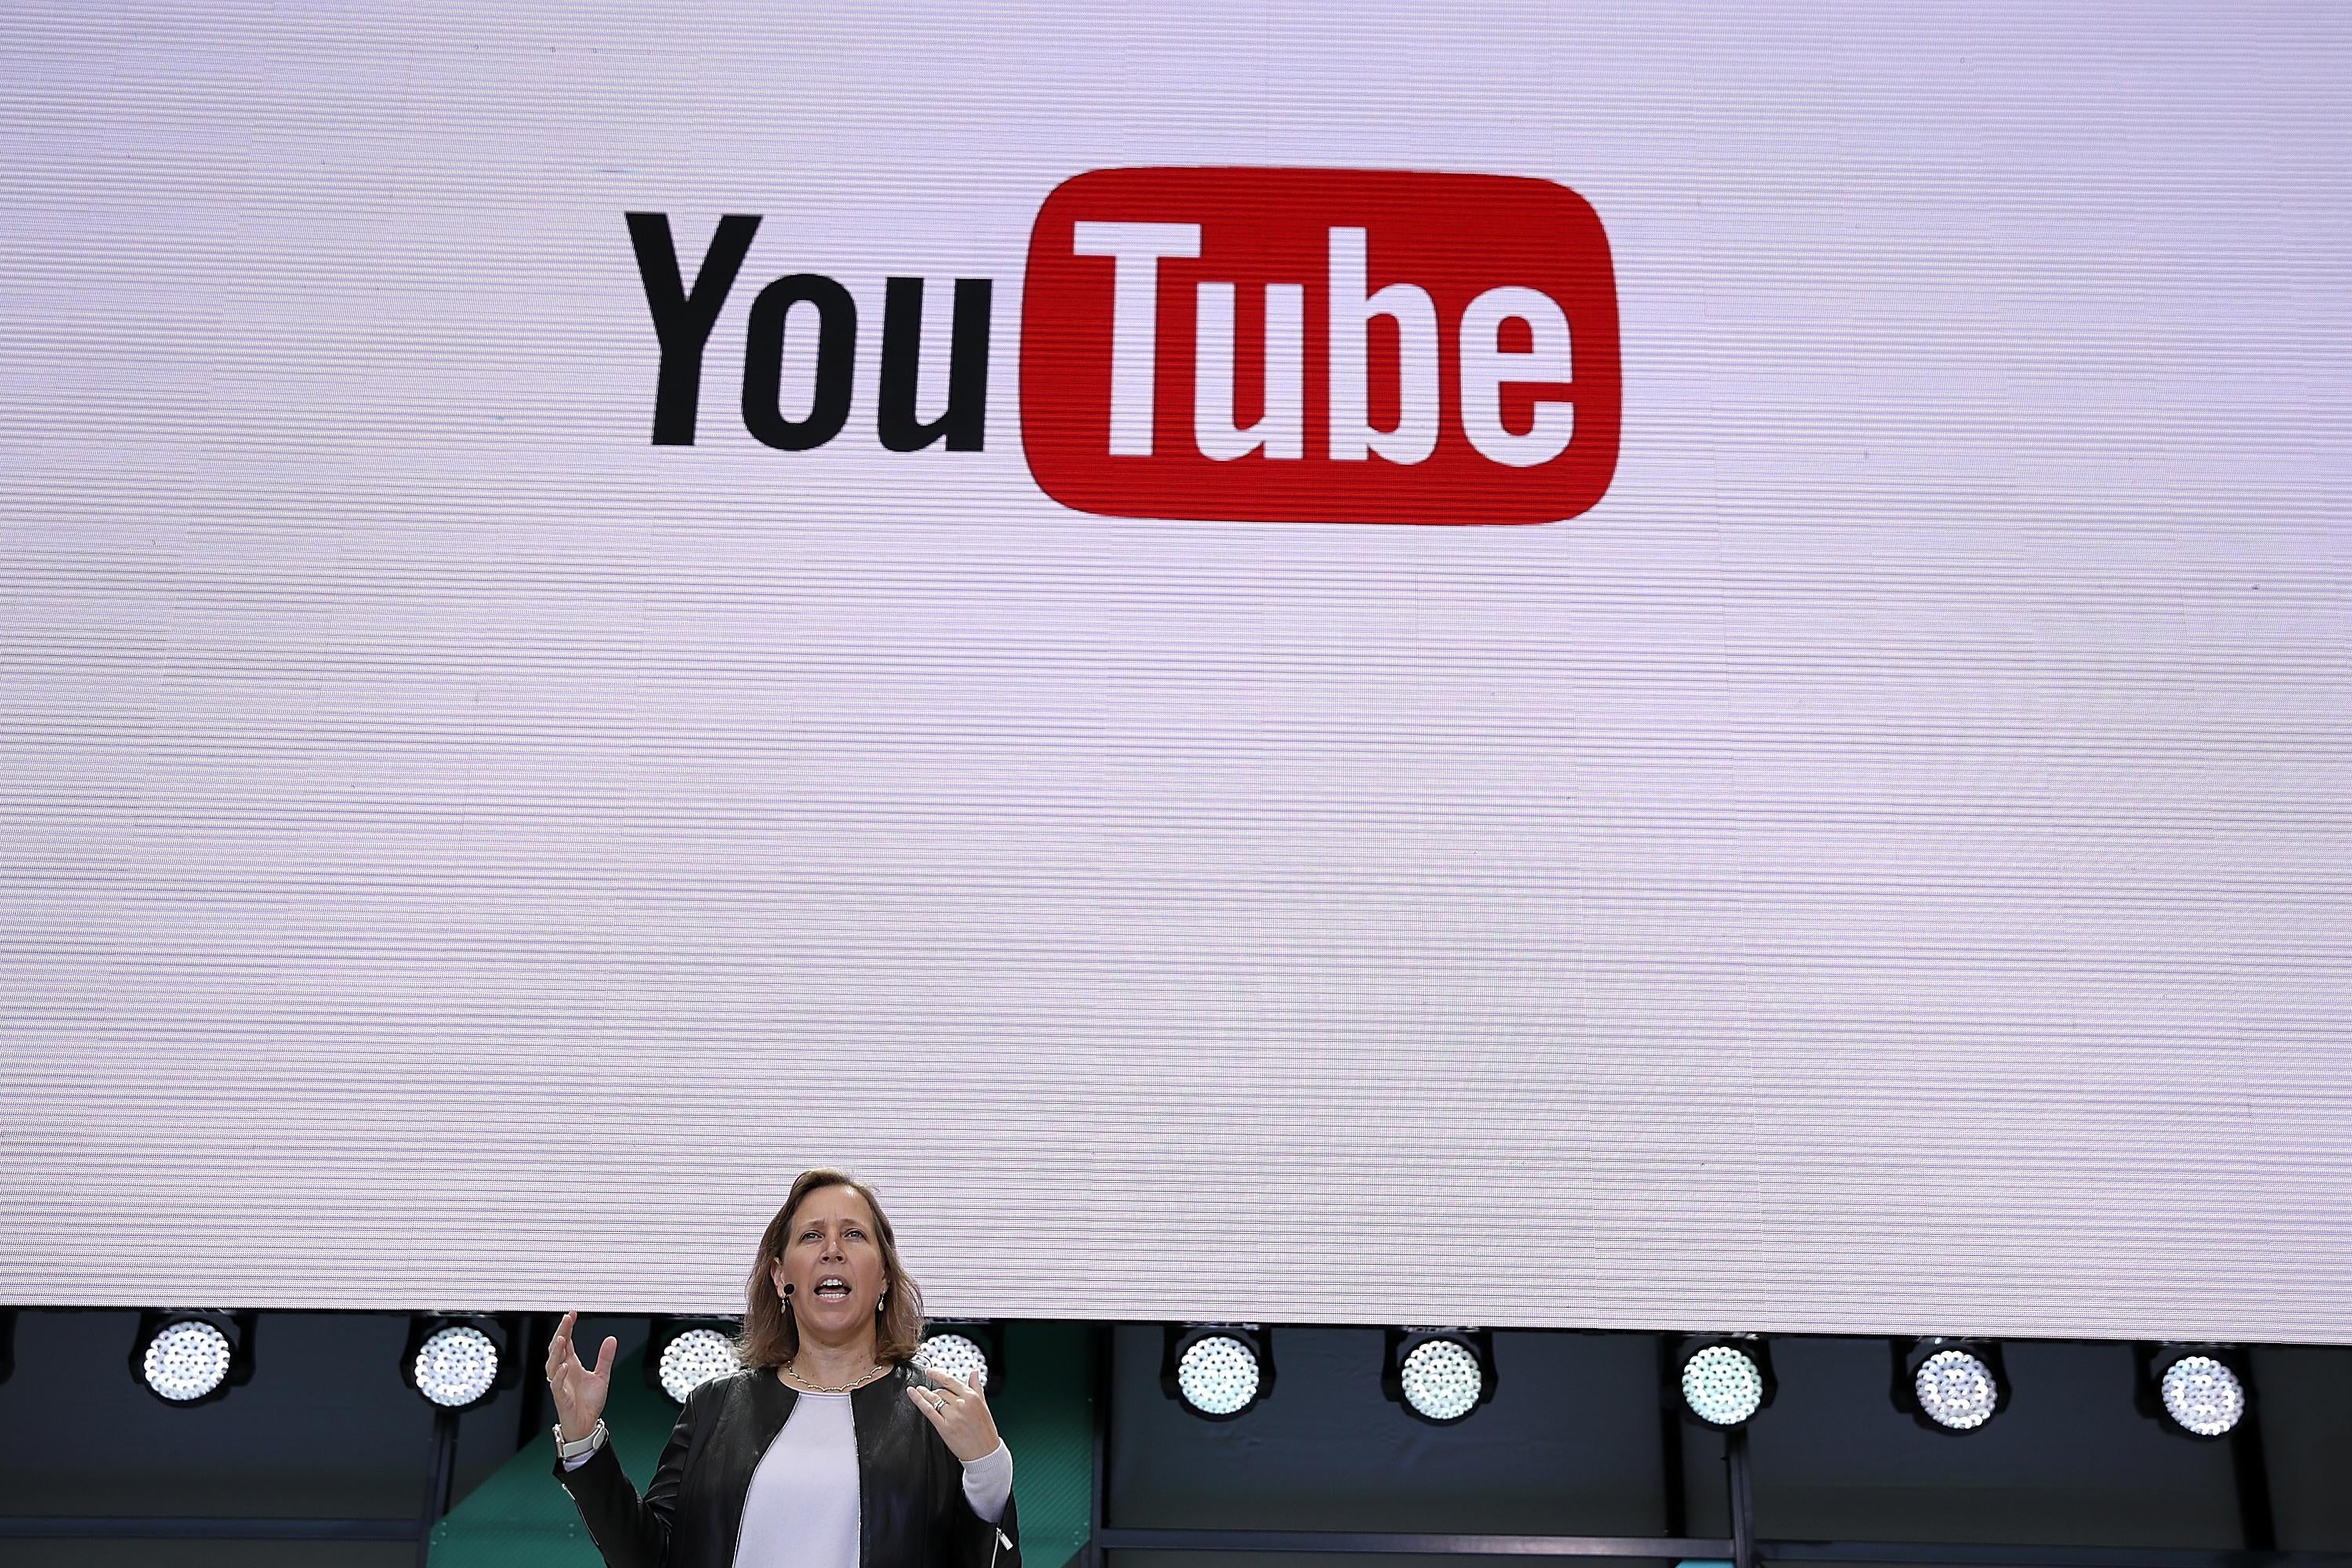  YouTube CEO Susan Wojcicki speaks during the opening keynote address at the Google I/O 2017 Conference.